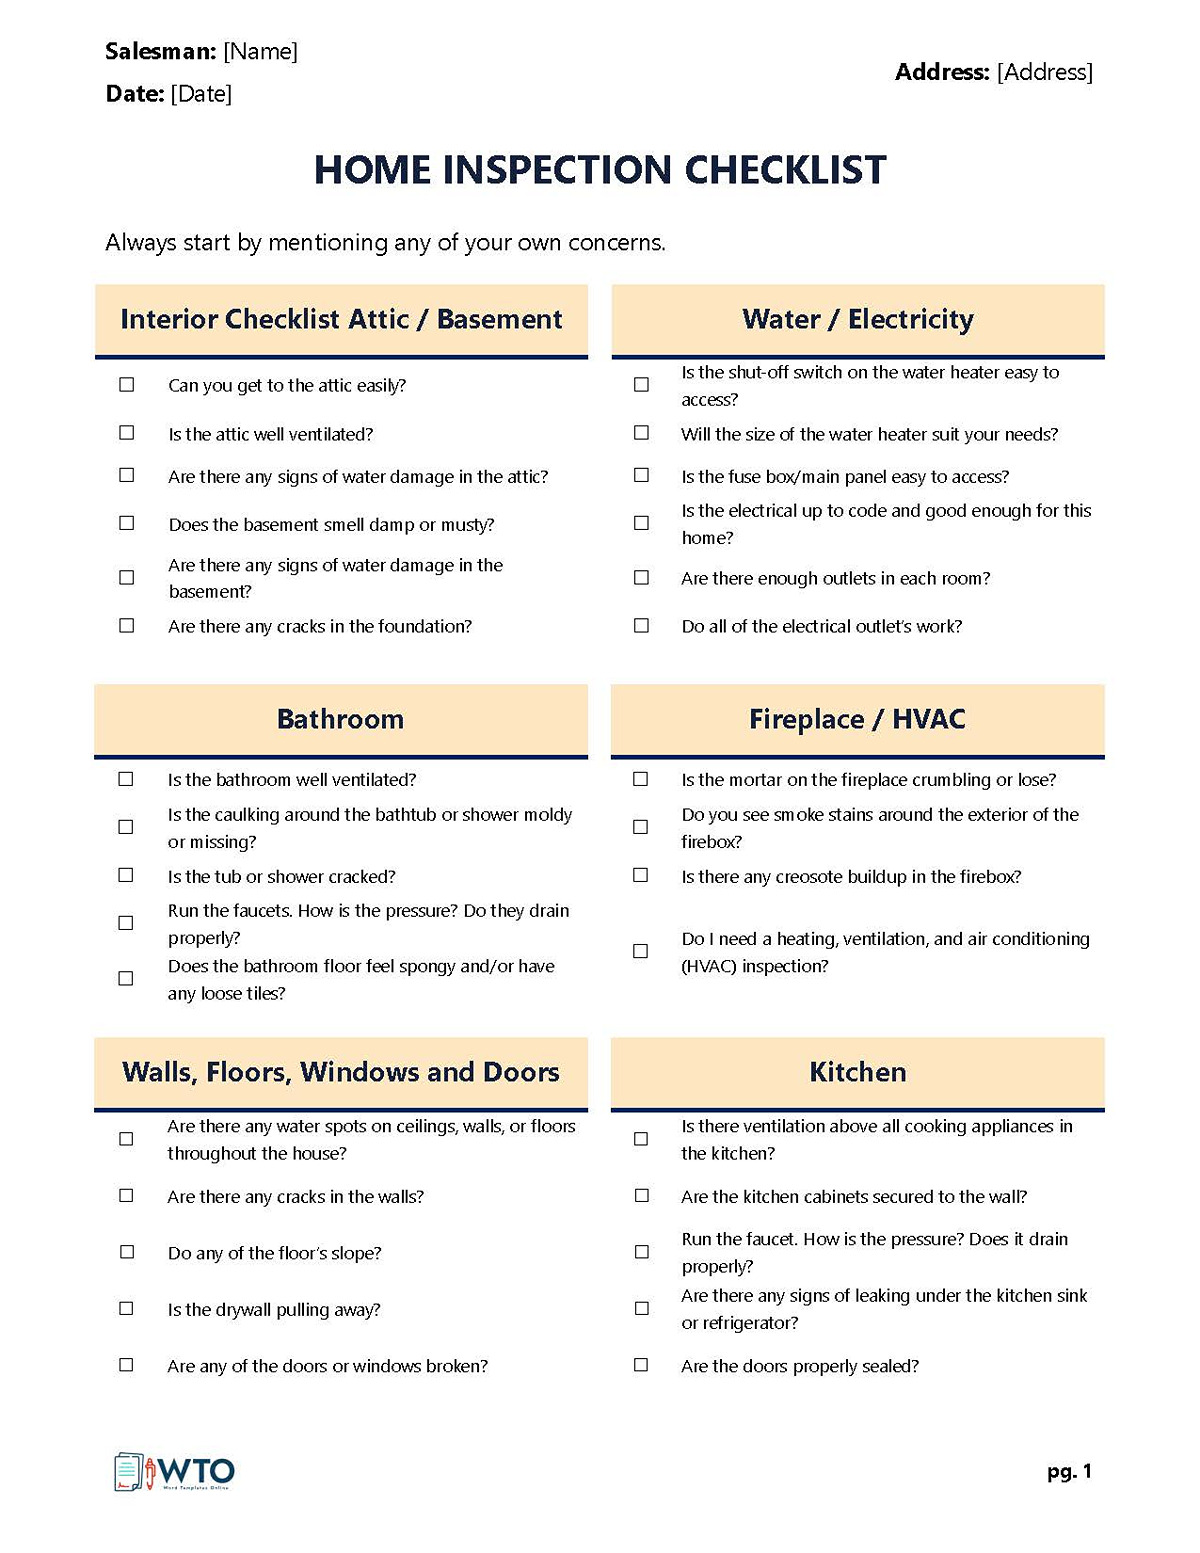 Free Downloadable Home Inspection Checklist Template 01 as Word Format